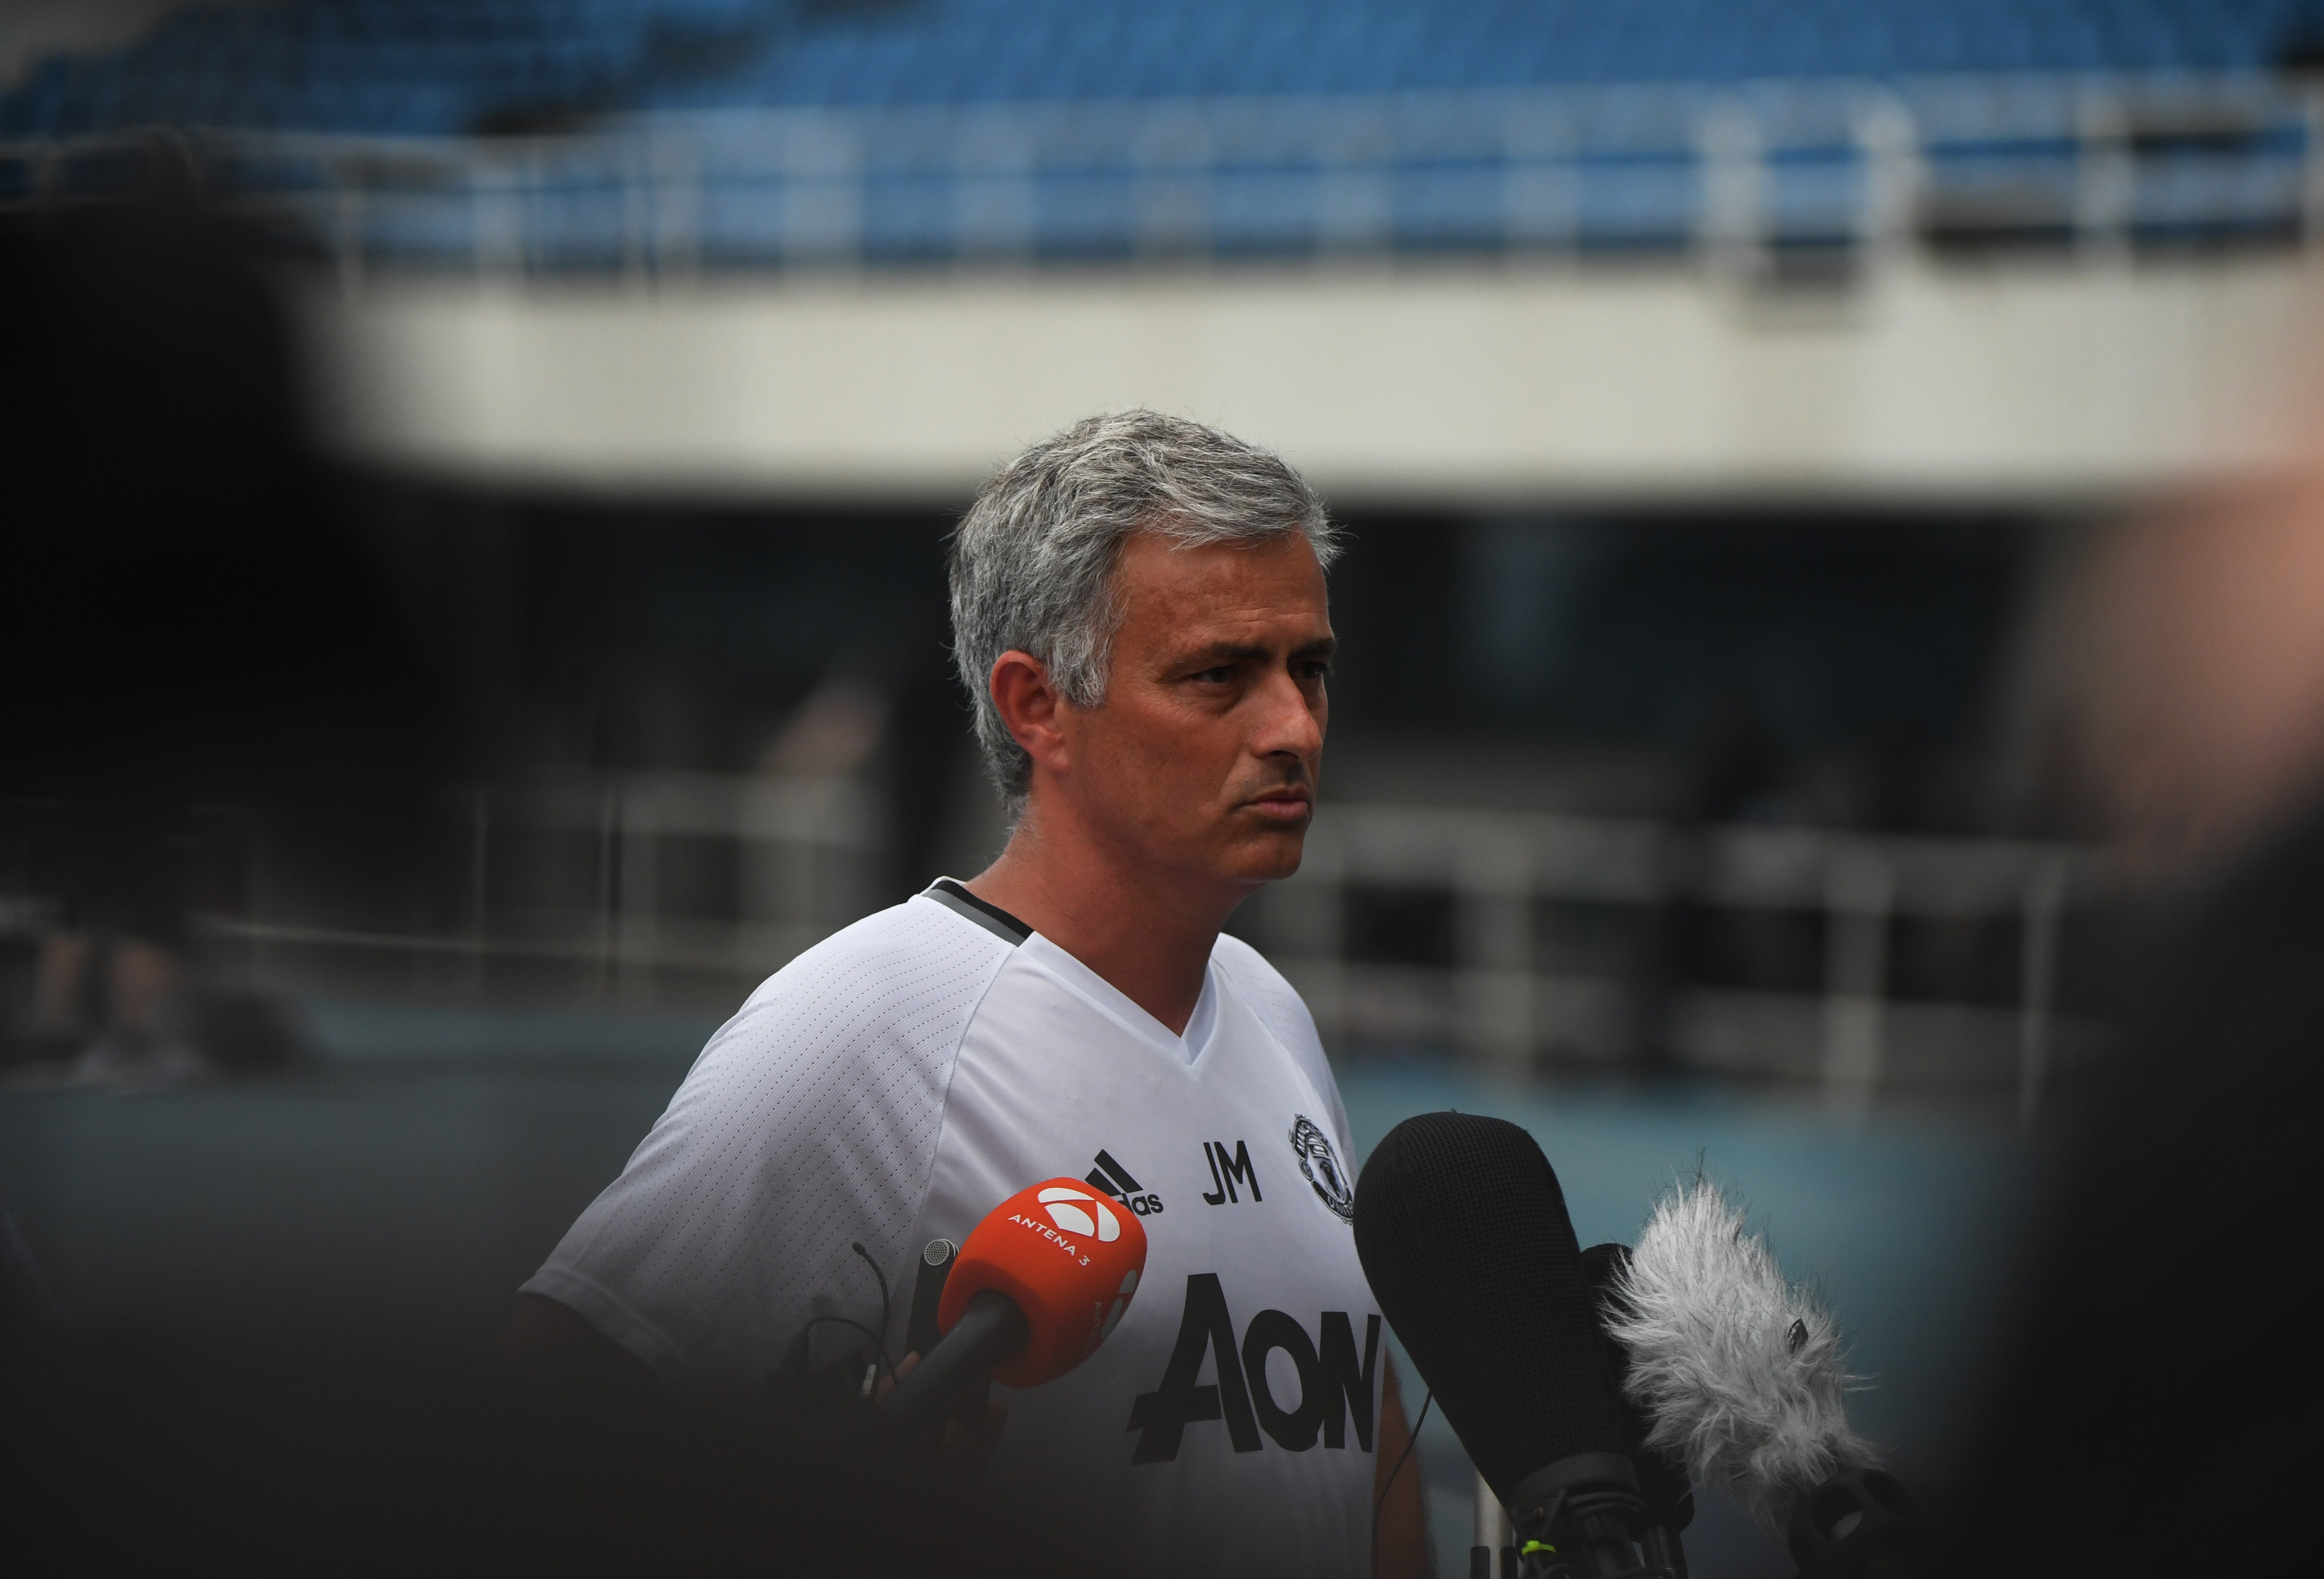 Manchester United coach Jose Mourinho speaks to media before a training session a day before the 2016 International Champions Cup football match between Manchester City and Manchester United, in Beijing on July 24, 2016. / AFP / GREG BAKER        (Photo credit should read GREG BAKER/AFP/Getty Images)